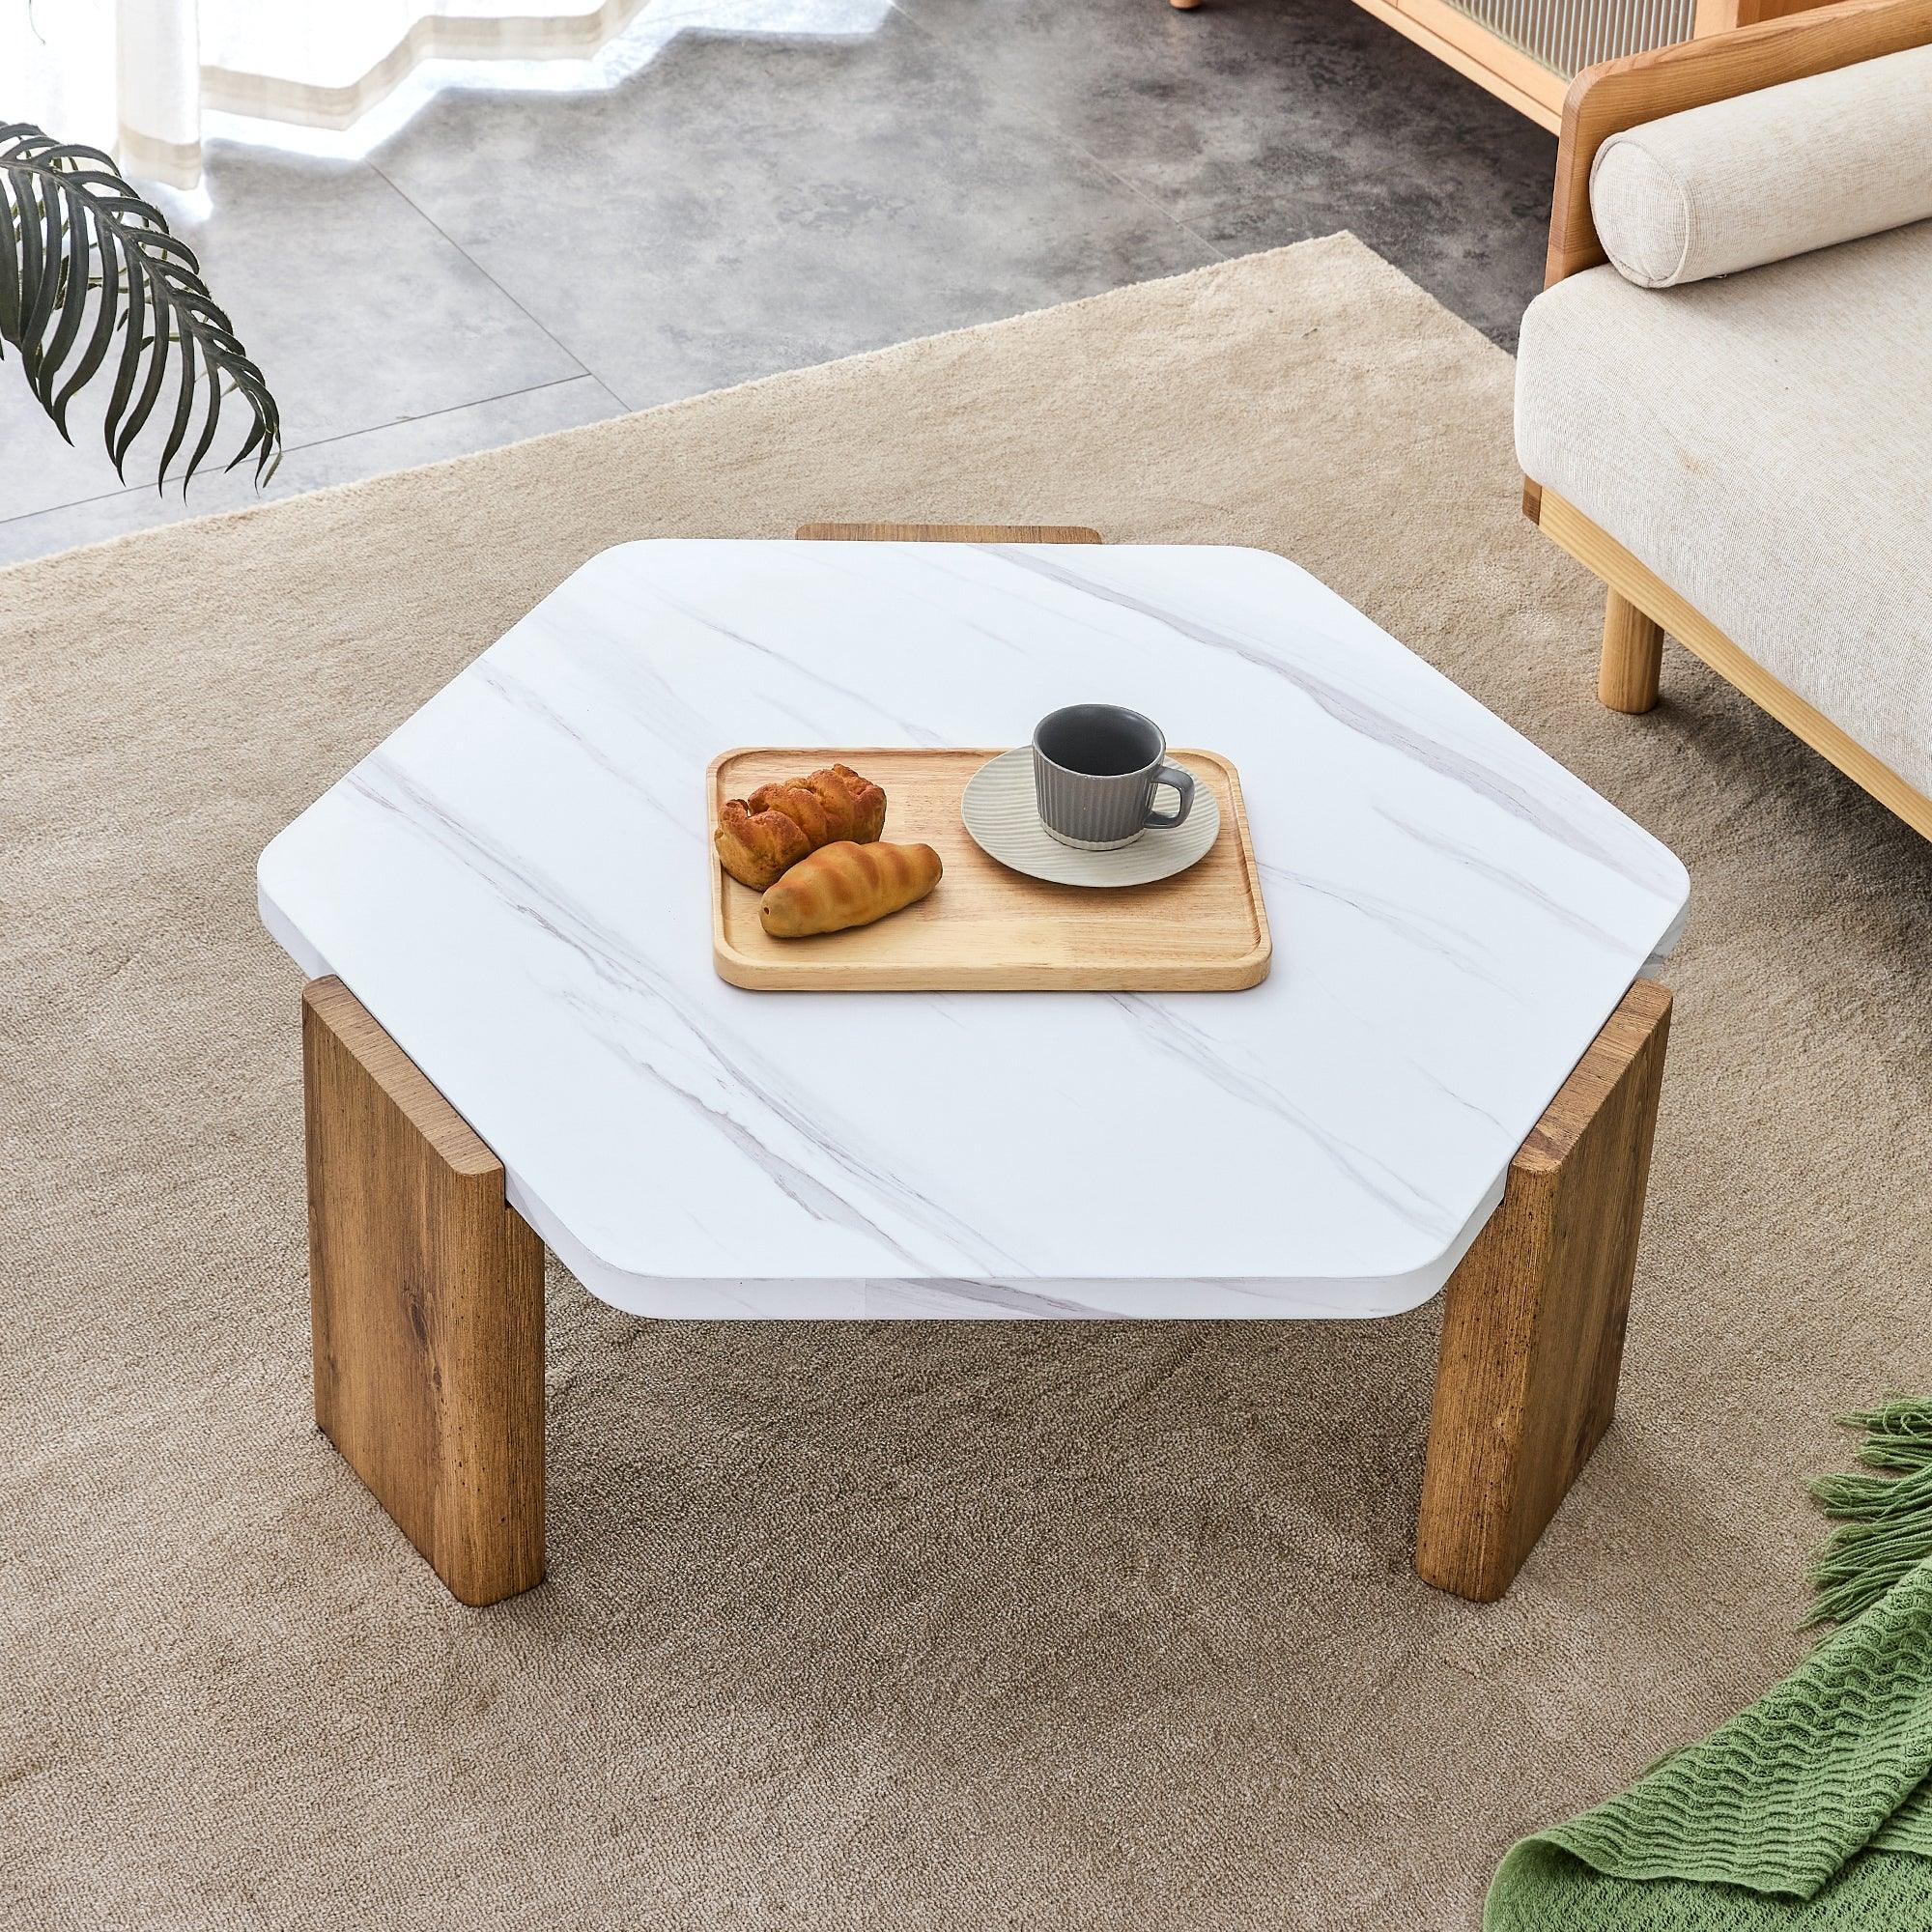 🆓🚛 Modern Practical Mdf Coffee Table With White Tabletop & Wooden Toned Legs Suitable for Living Rooms & Guest Rooms.